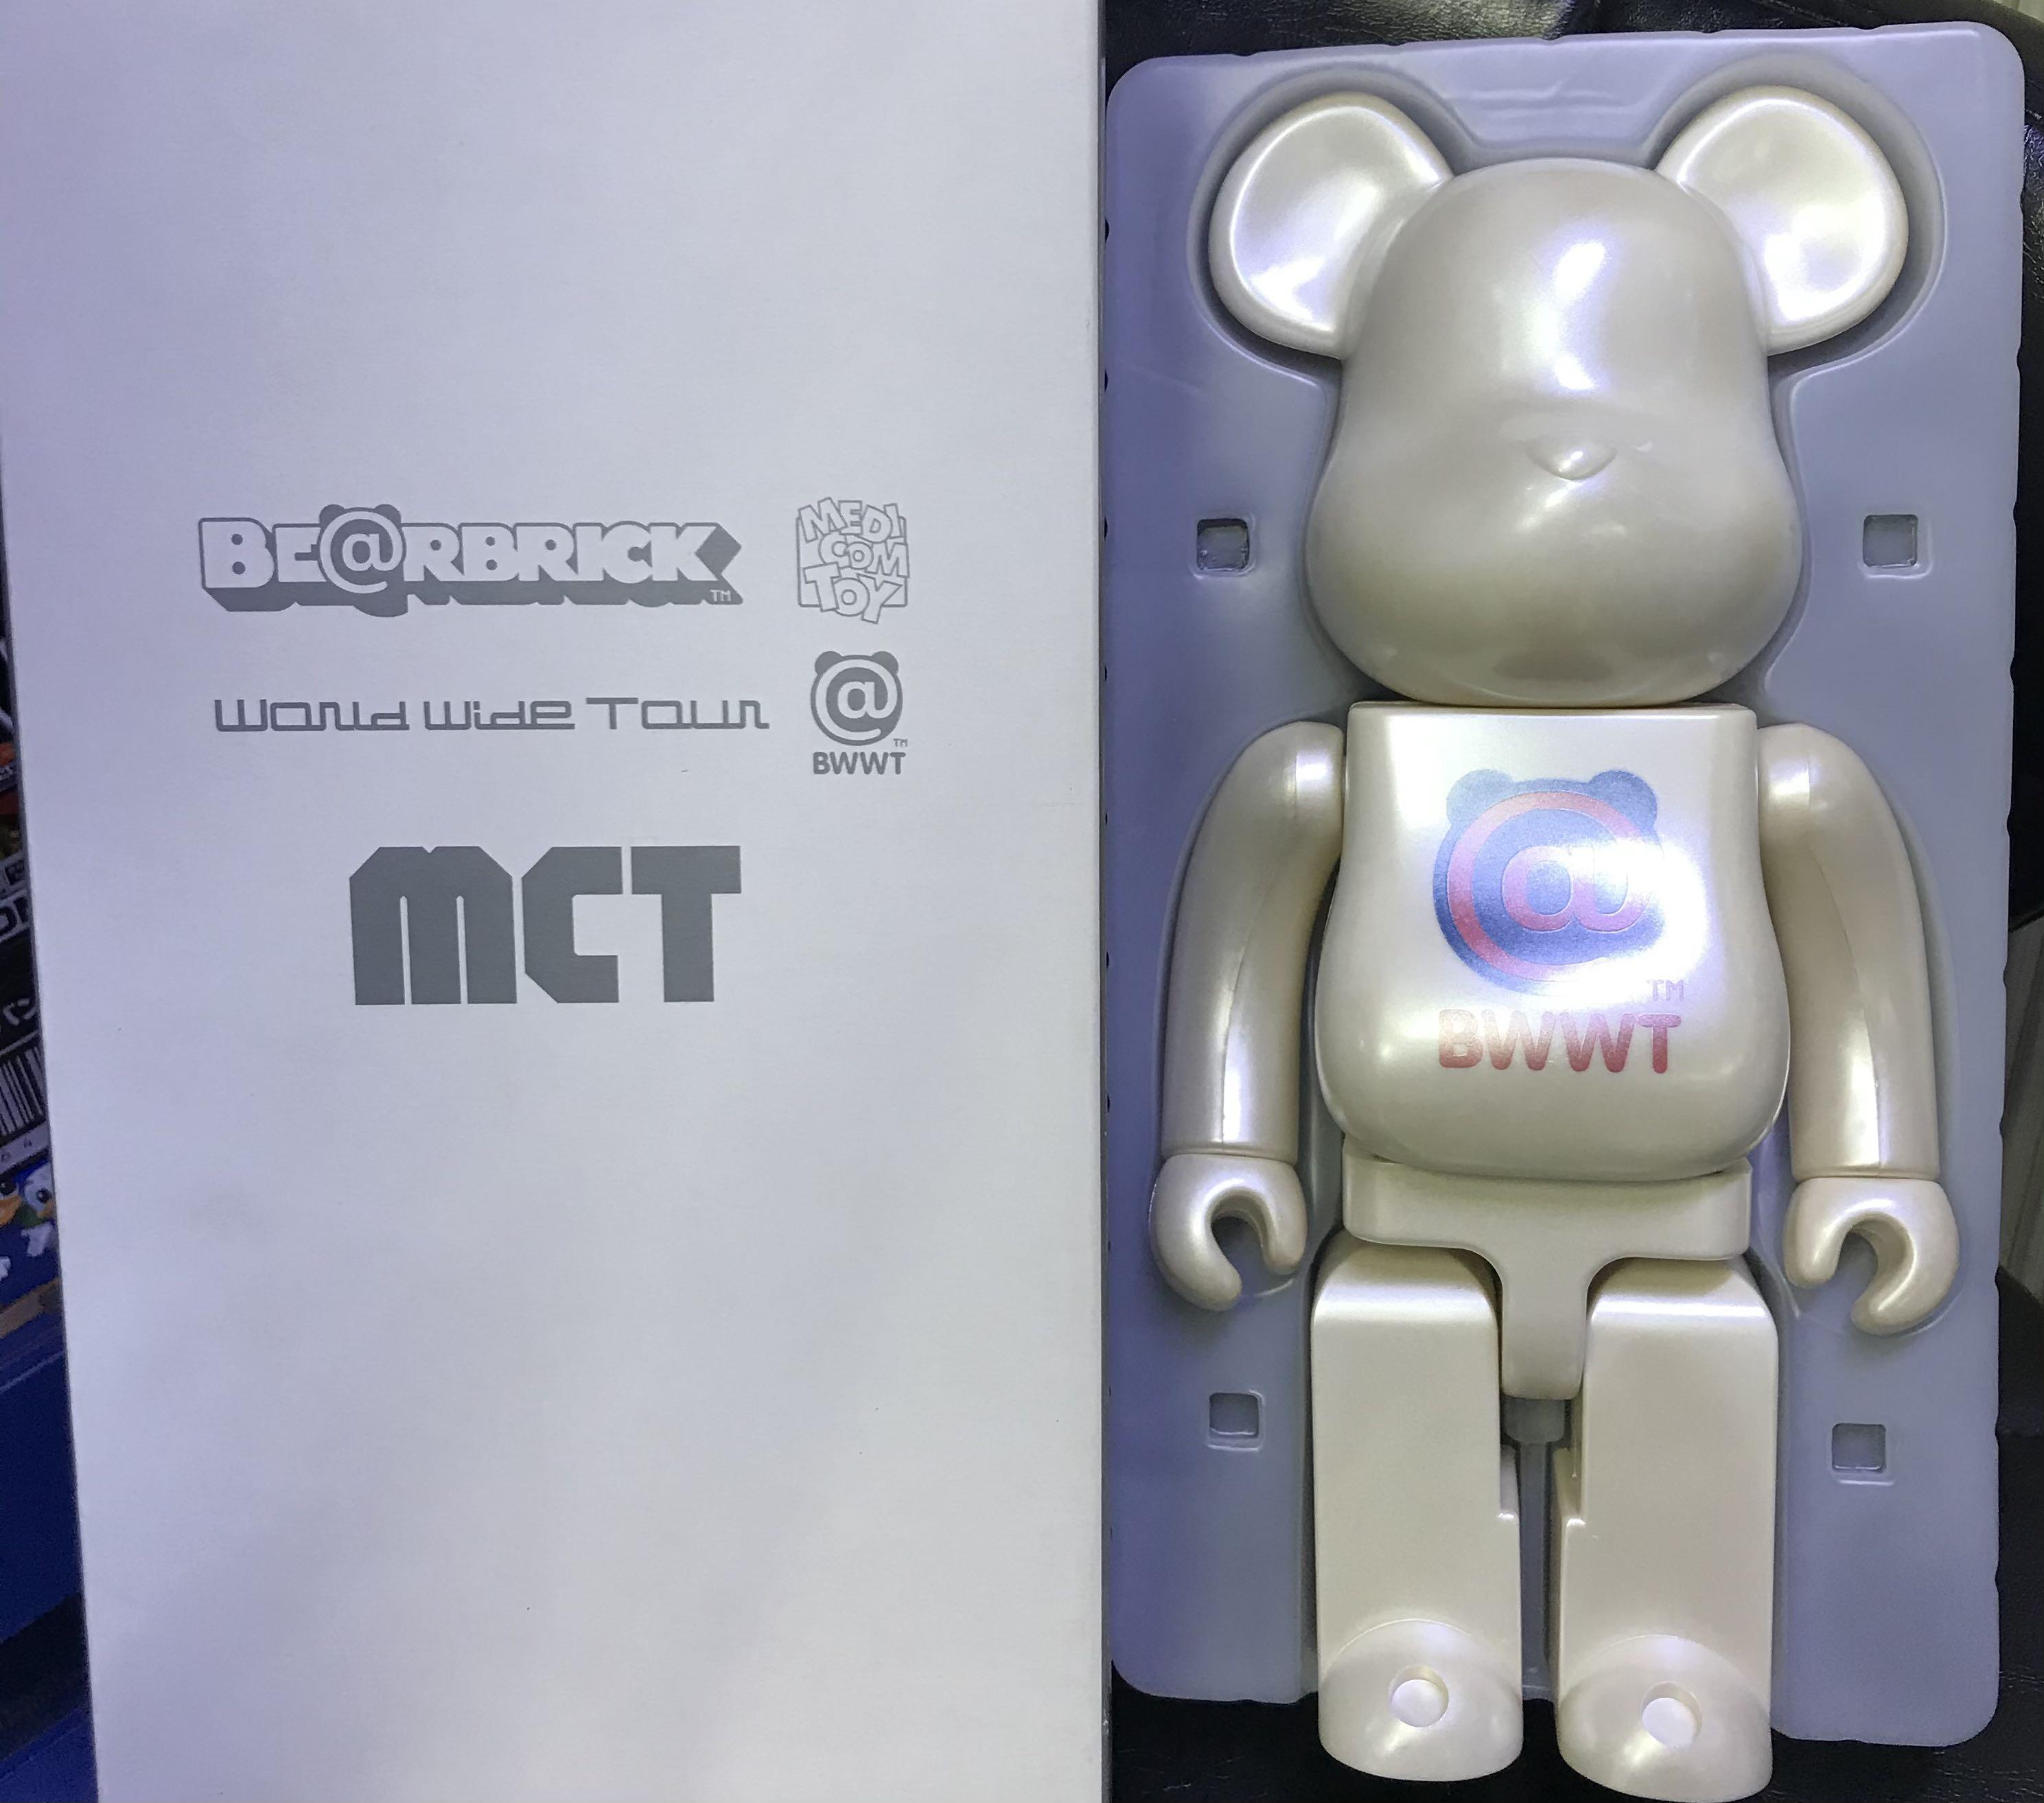 BE@RBRICK 2004 WORLD WIDE TOUR-